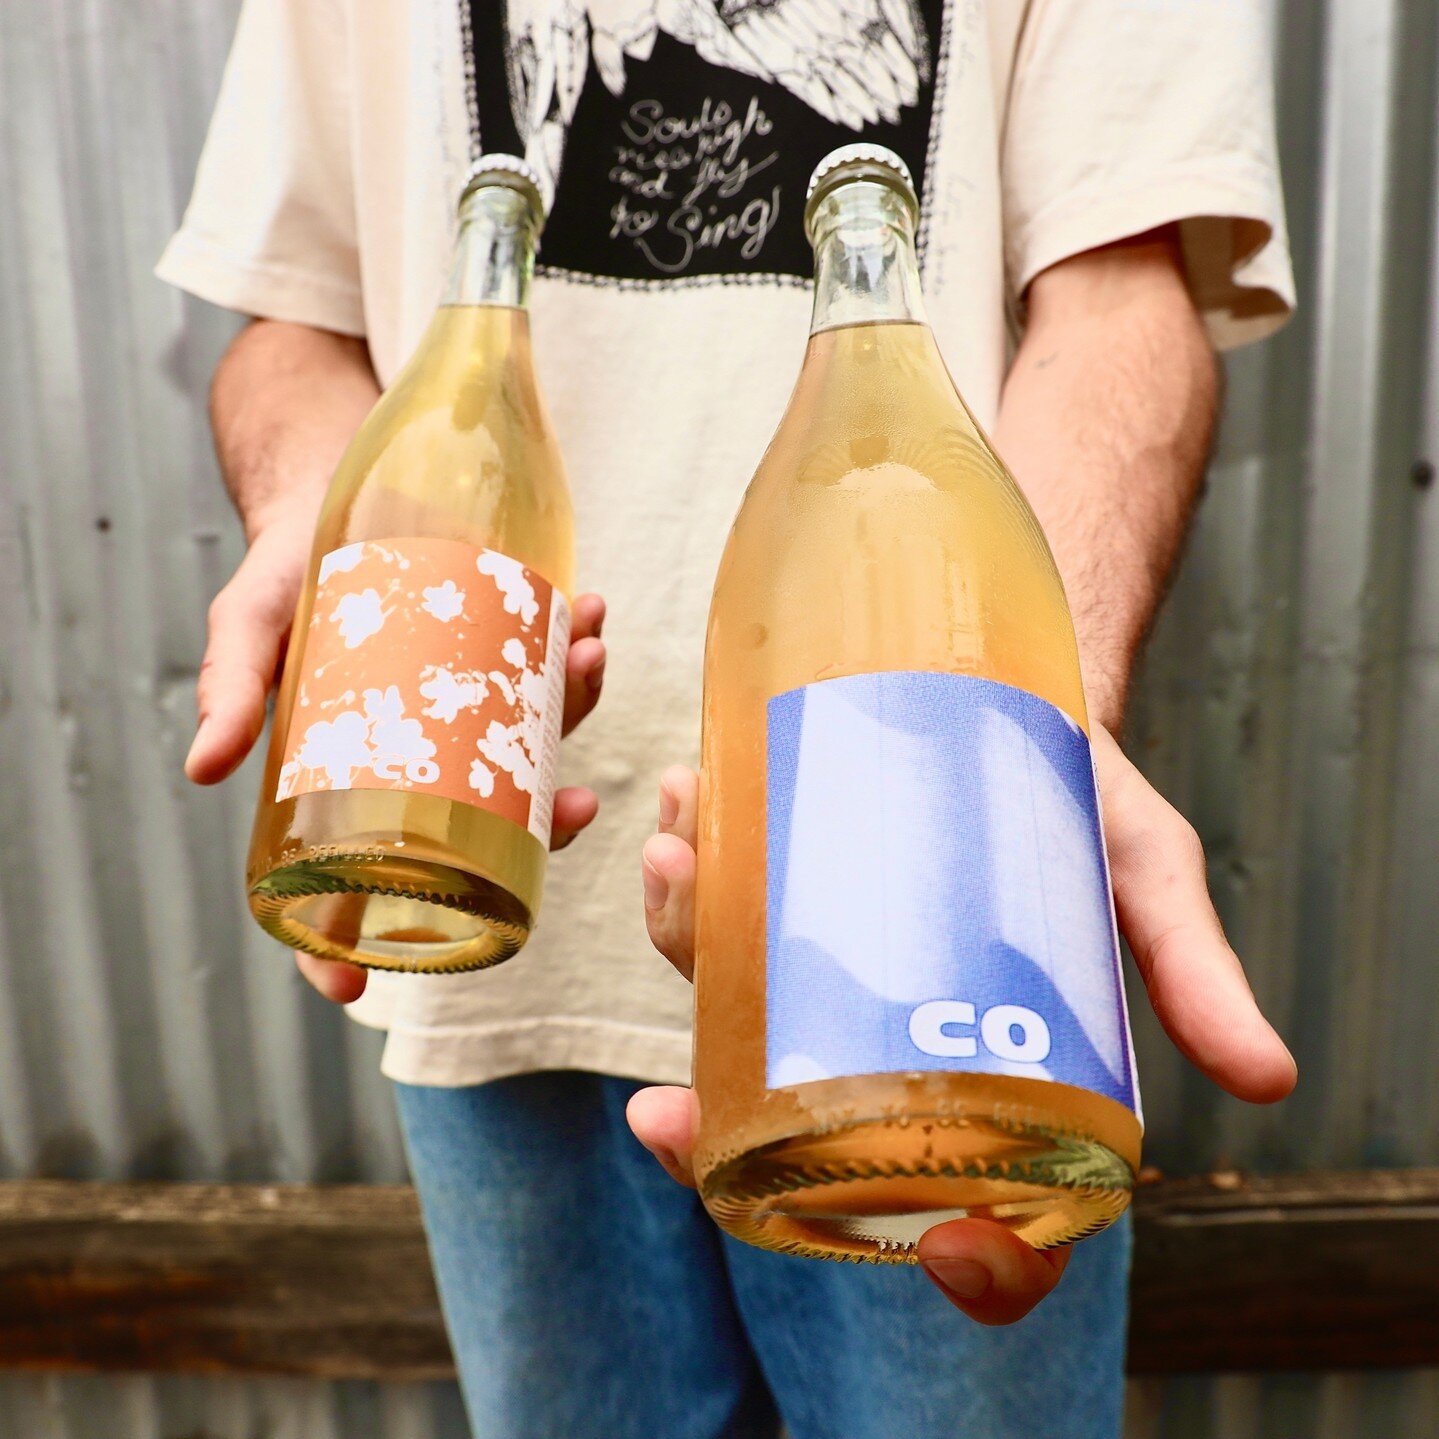 Take your pick of these two lovely naturals from @coferments 💕 Peach &amp; quince!⁠
⁠
⁠
#lanesedgewinebar #melbournewine #bourkestmelbourne #melbournecbdbars #courtyardwine #foodandwine #naturalwines